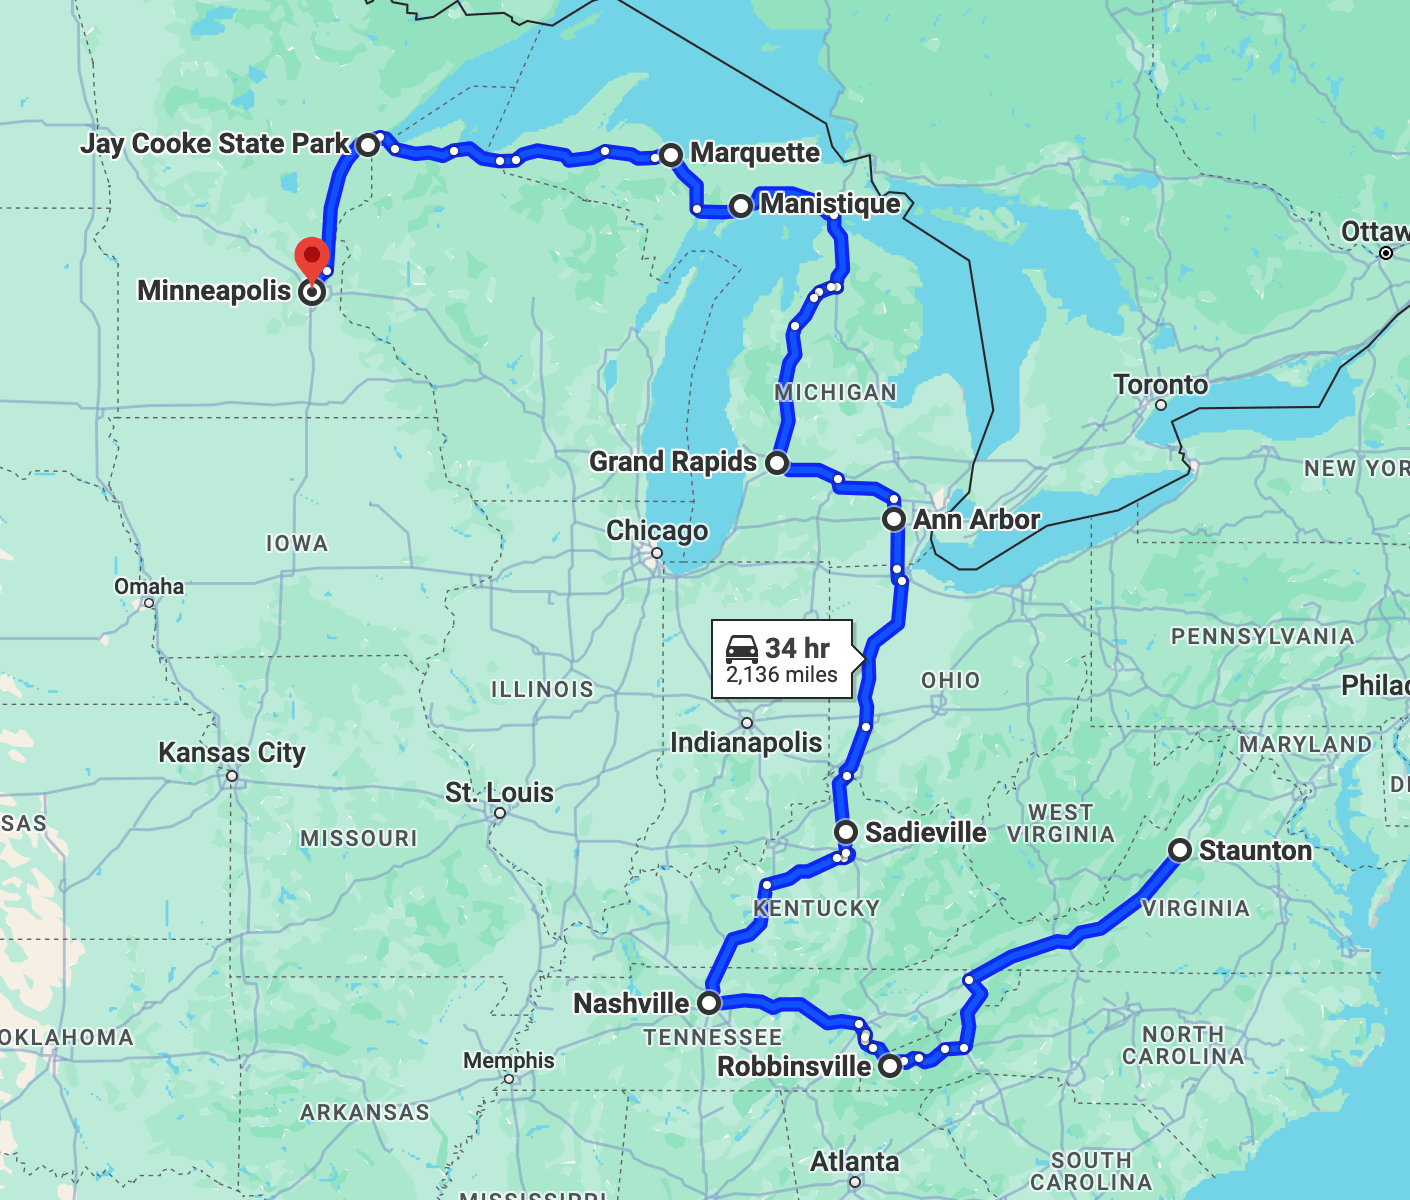 My approximate route, as shown in Google Maps.